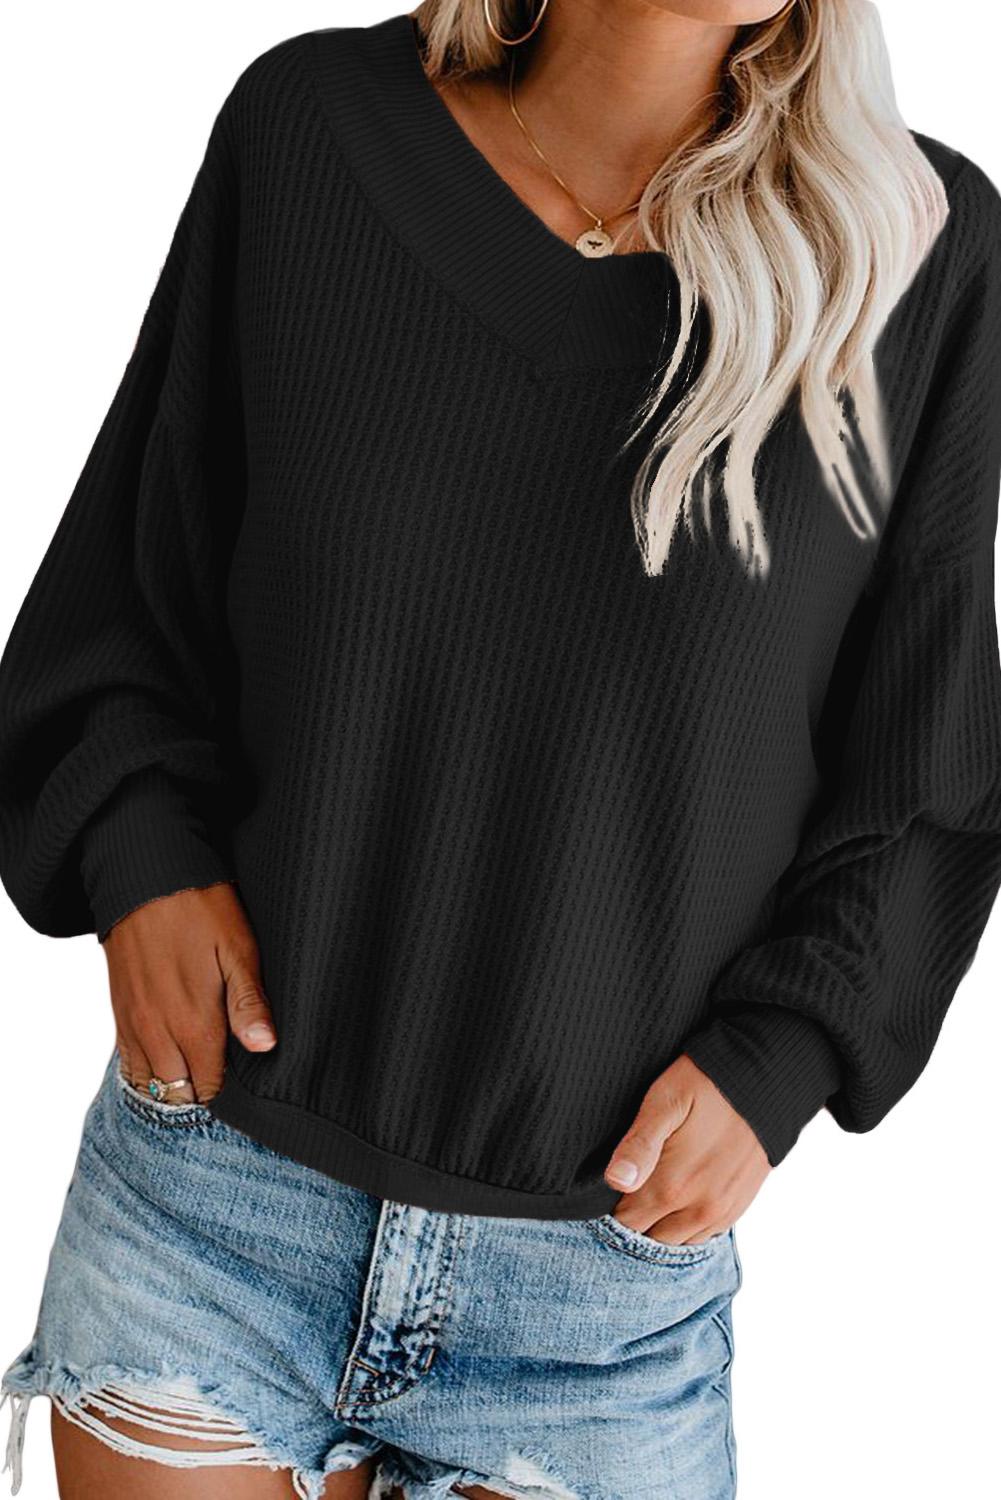 Shoshanna Womens Off Shoulder Batwing Sleeve Oversized Knit Pullover ...